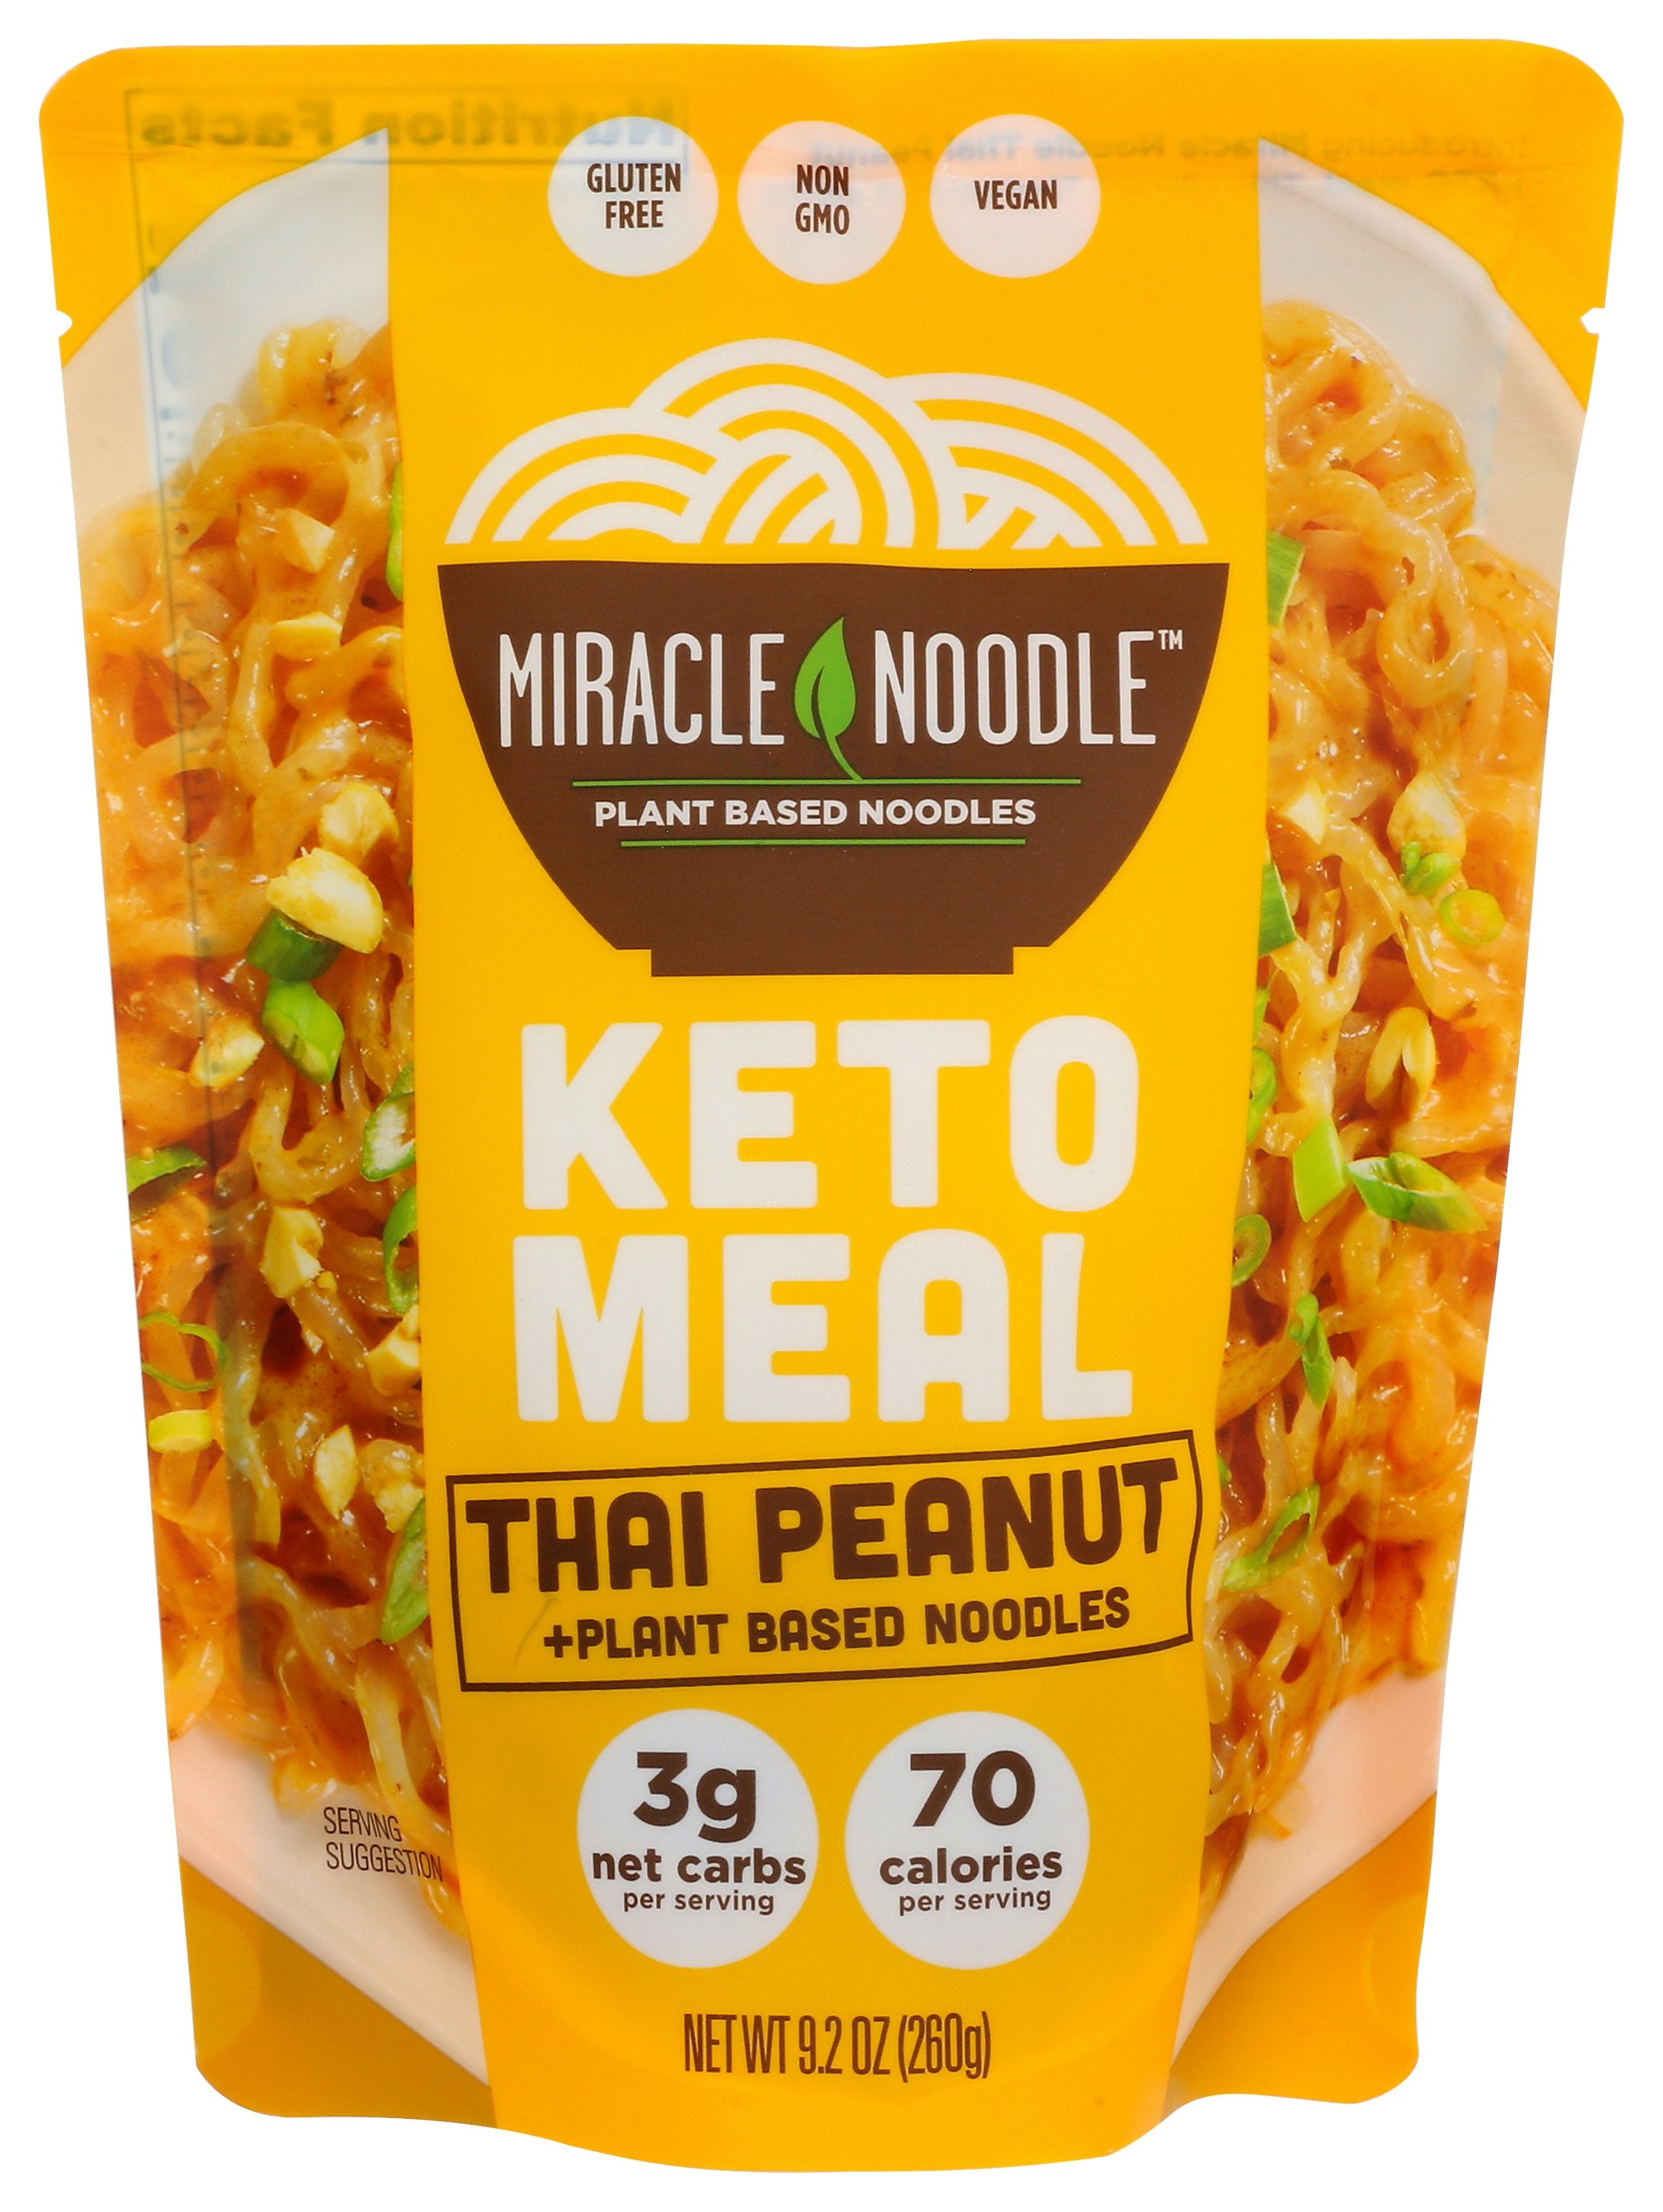 MIRACLE NOODLE KETO MEAL THAI PEANUT - Case of 6